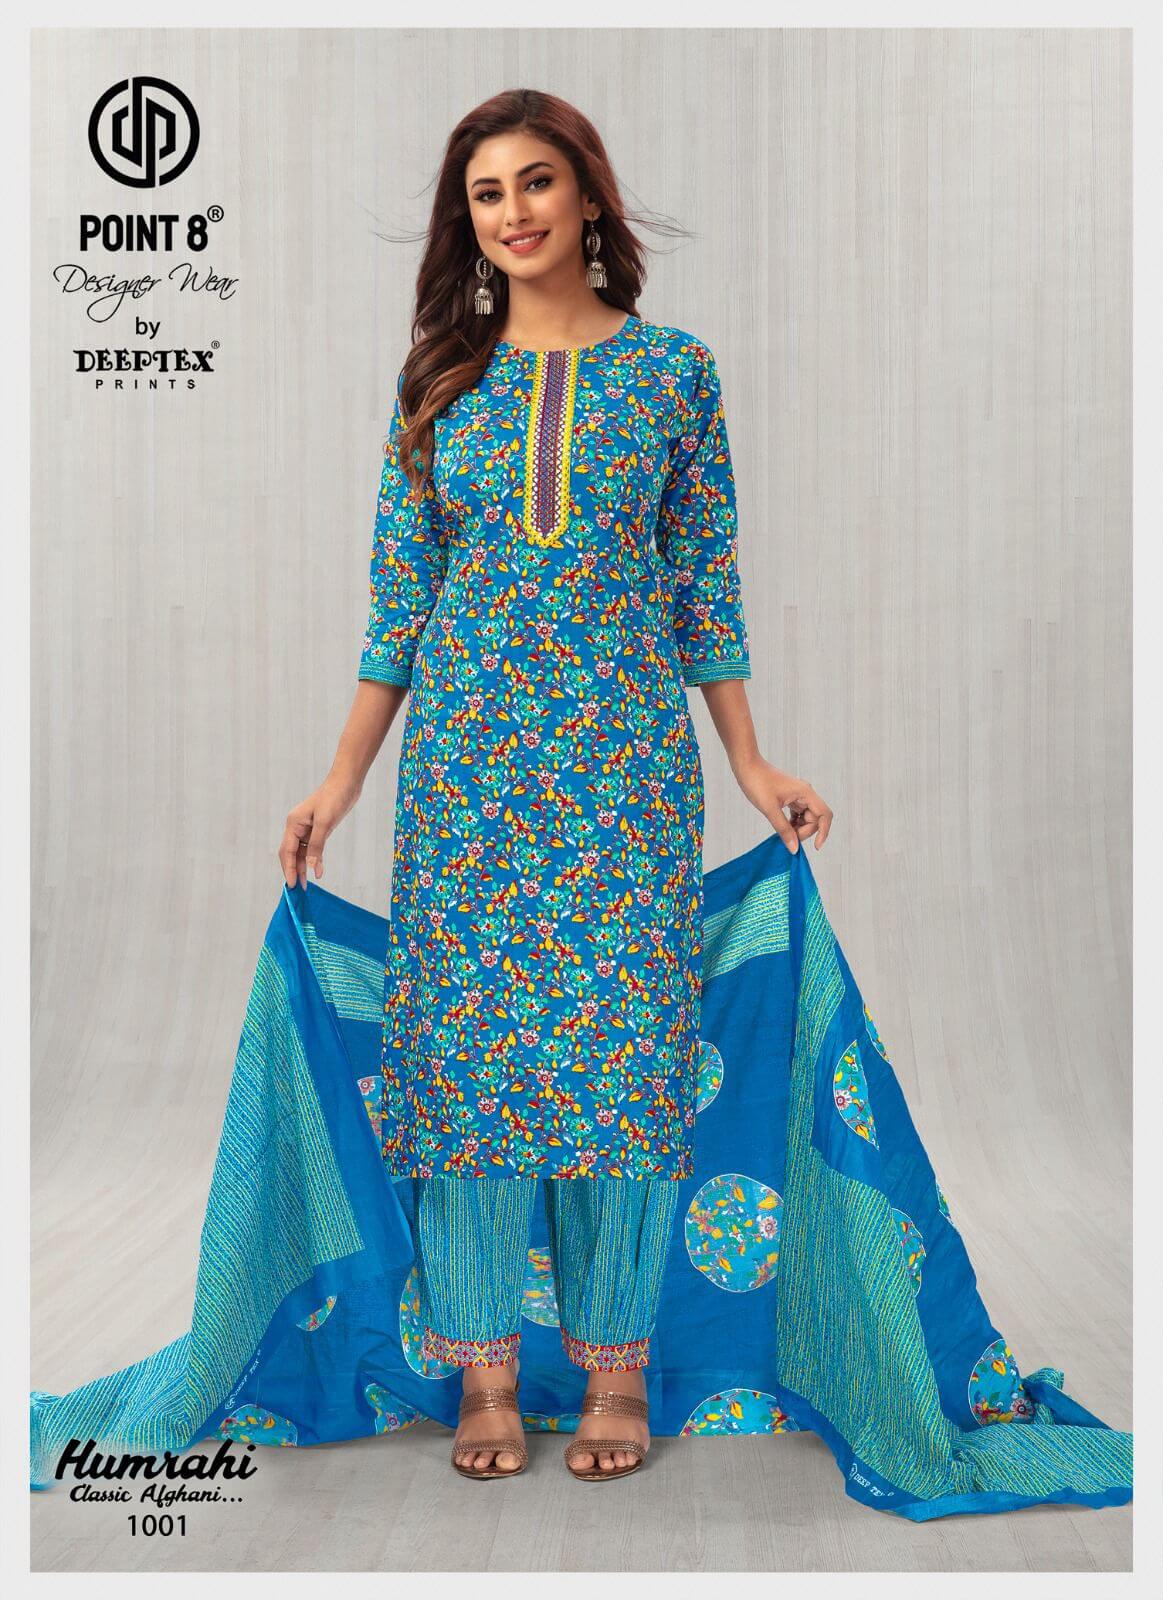 Deeptex Point 8 Humrahi vol 1 collection 5